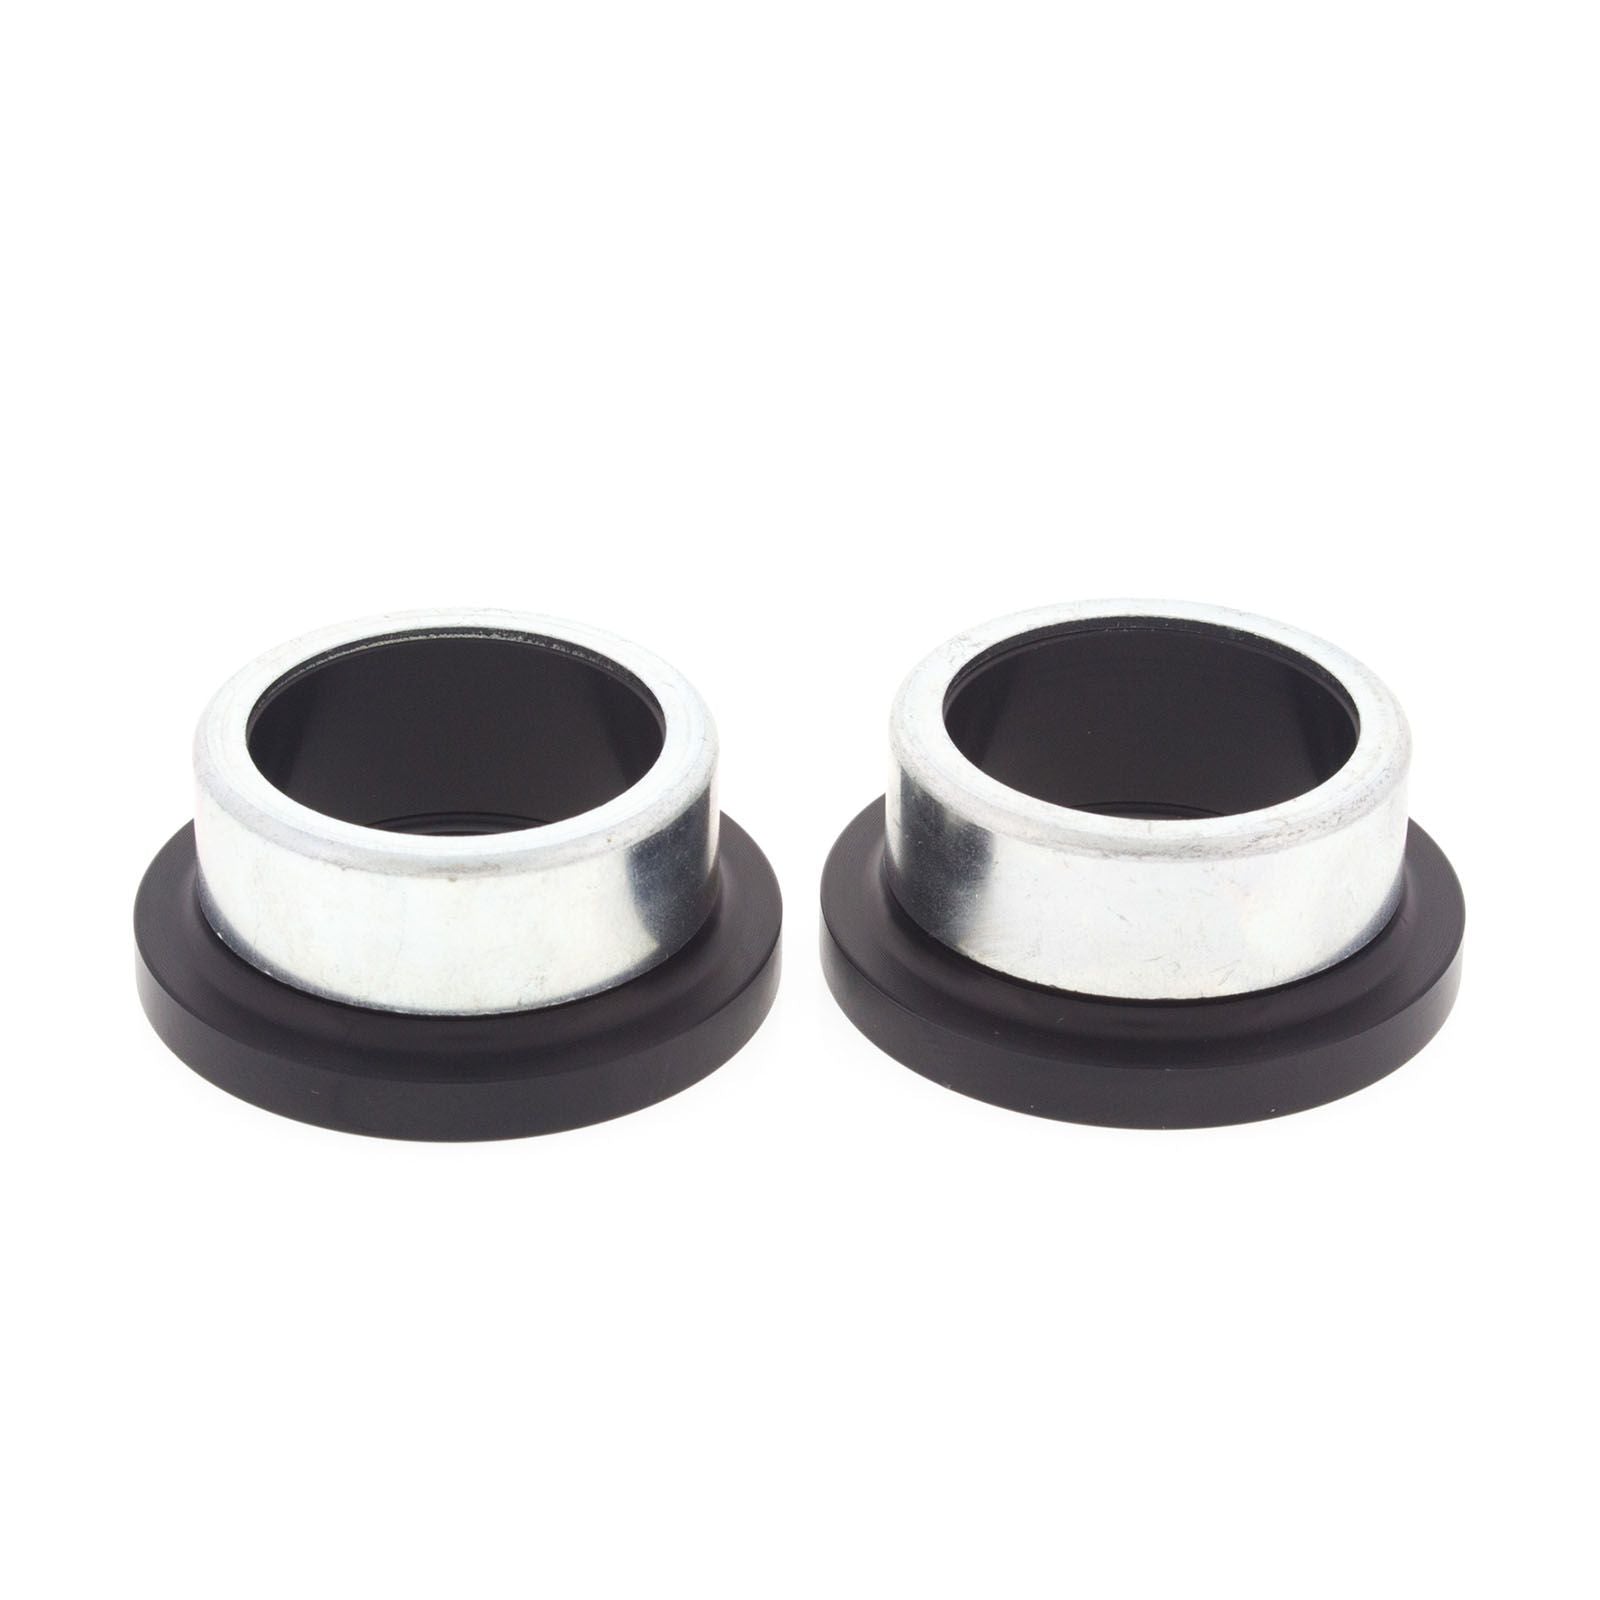 New ALL BALLS Racing Wheel Spacer Kit #AB1111021